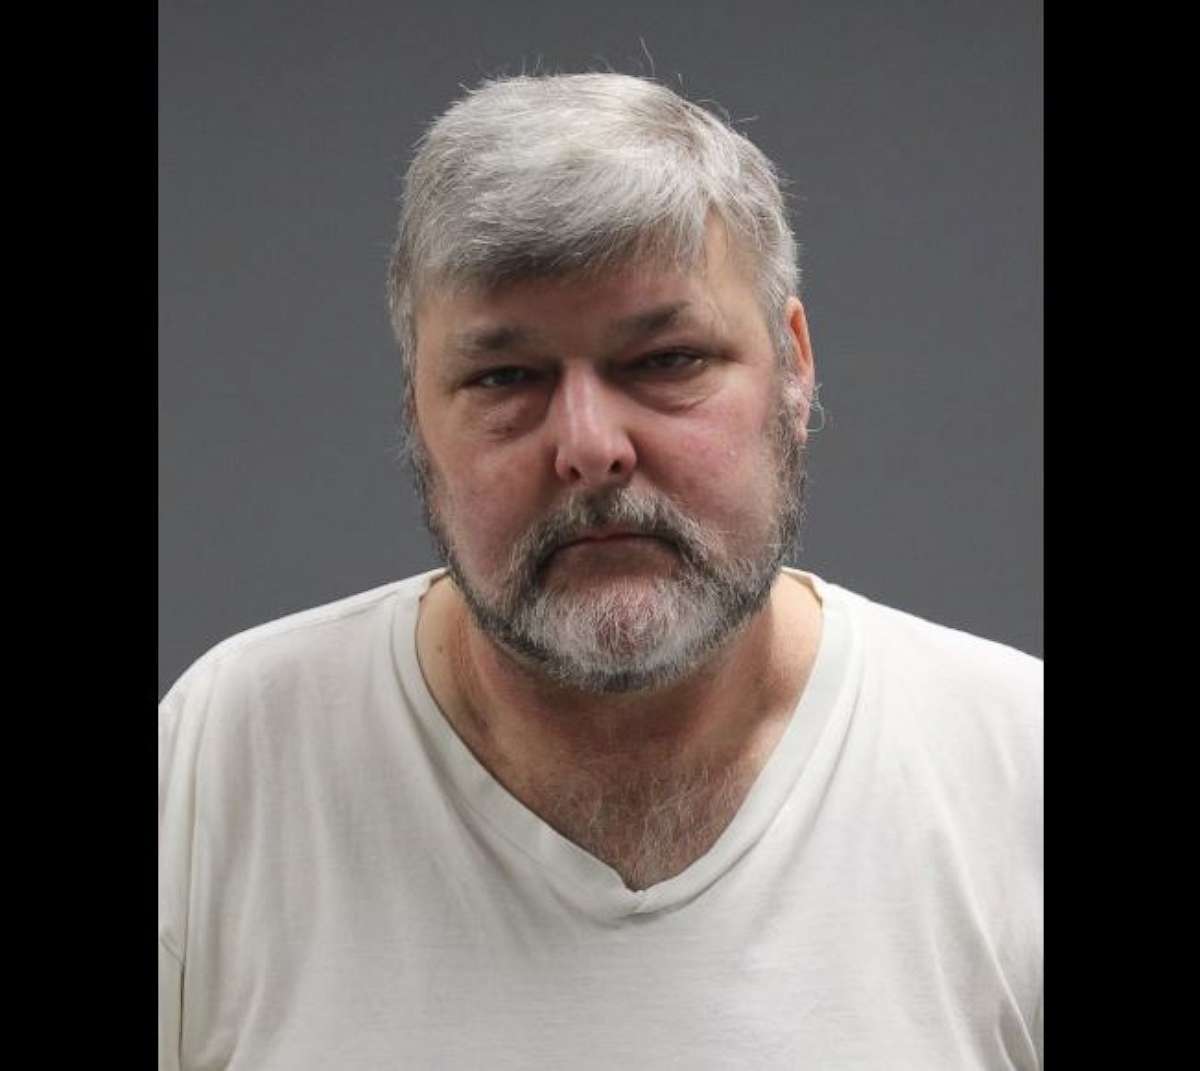 PHOTO: Alfred Purcell, a 57-year-old biology teacher at Southbridge High School, was arrested on Thursday, May 16, 2019. 